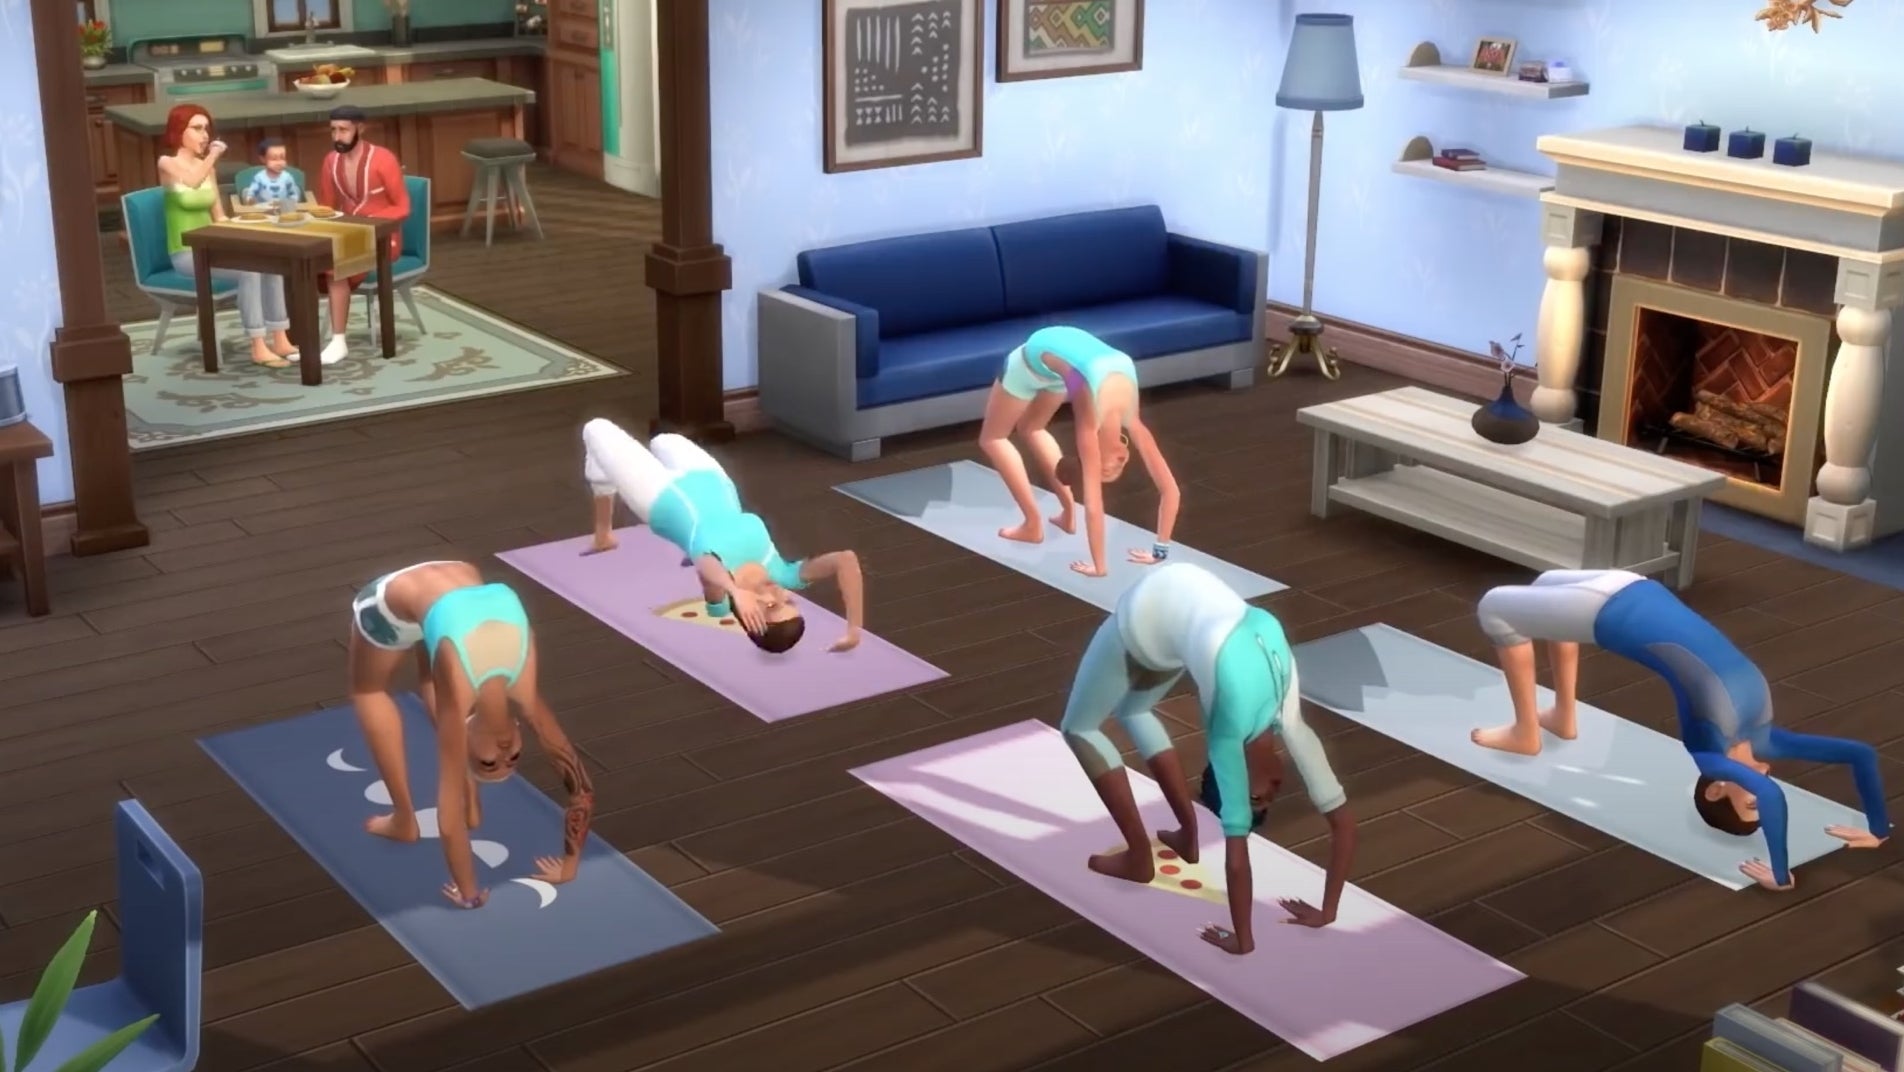 The Sims 4's old Spa Day expansion is getting a big content